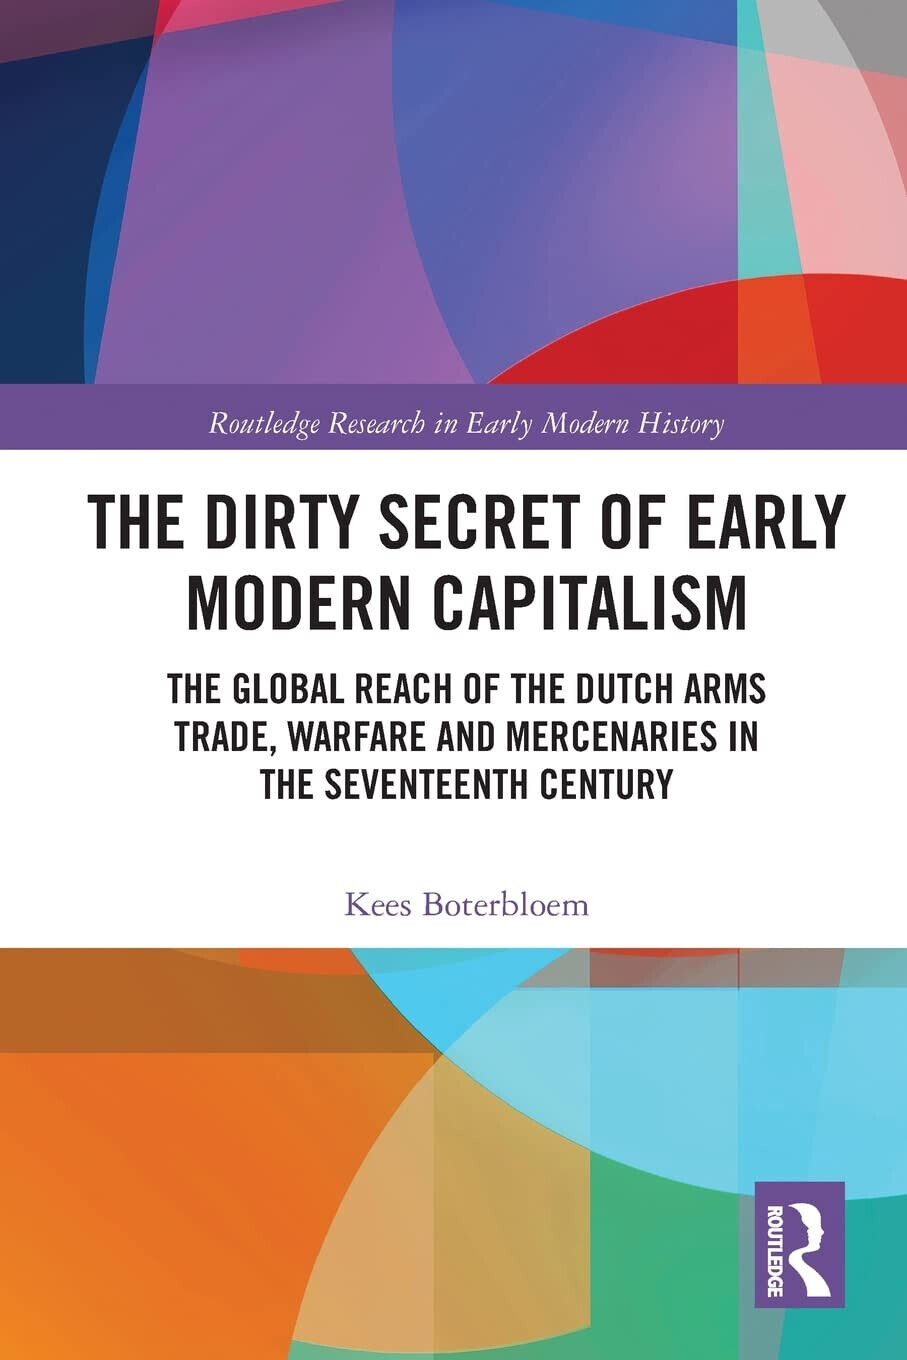 The Dirty Secret Of Early Modern Capitalism - Kees Boterbloem - 2021